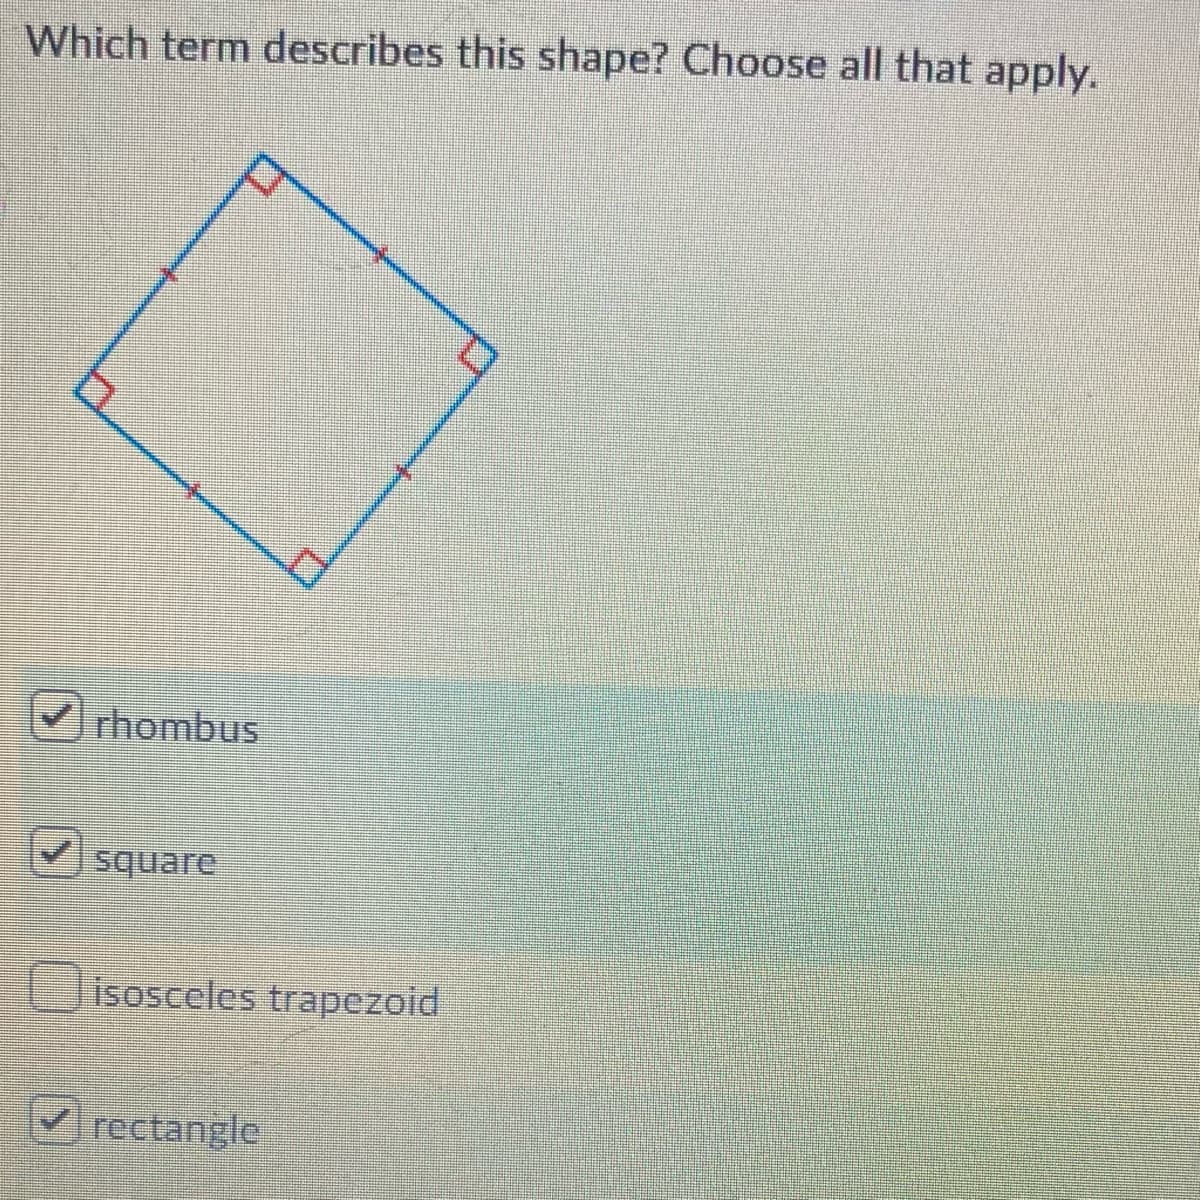 Which term describes this shape? Choose all that apply.
rhombus
square
isosceles trapezoid
rectangle
